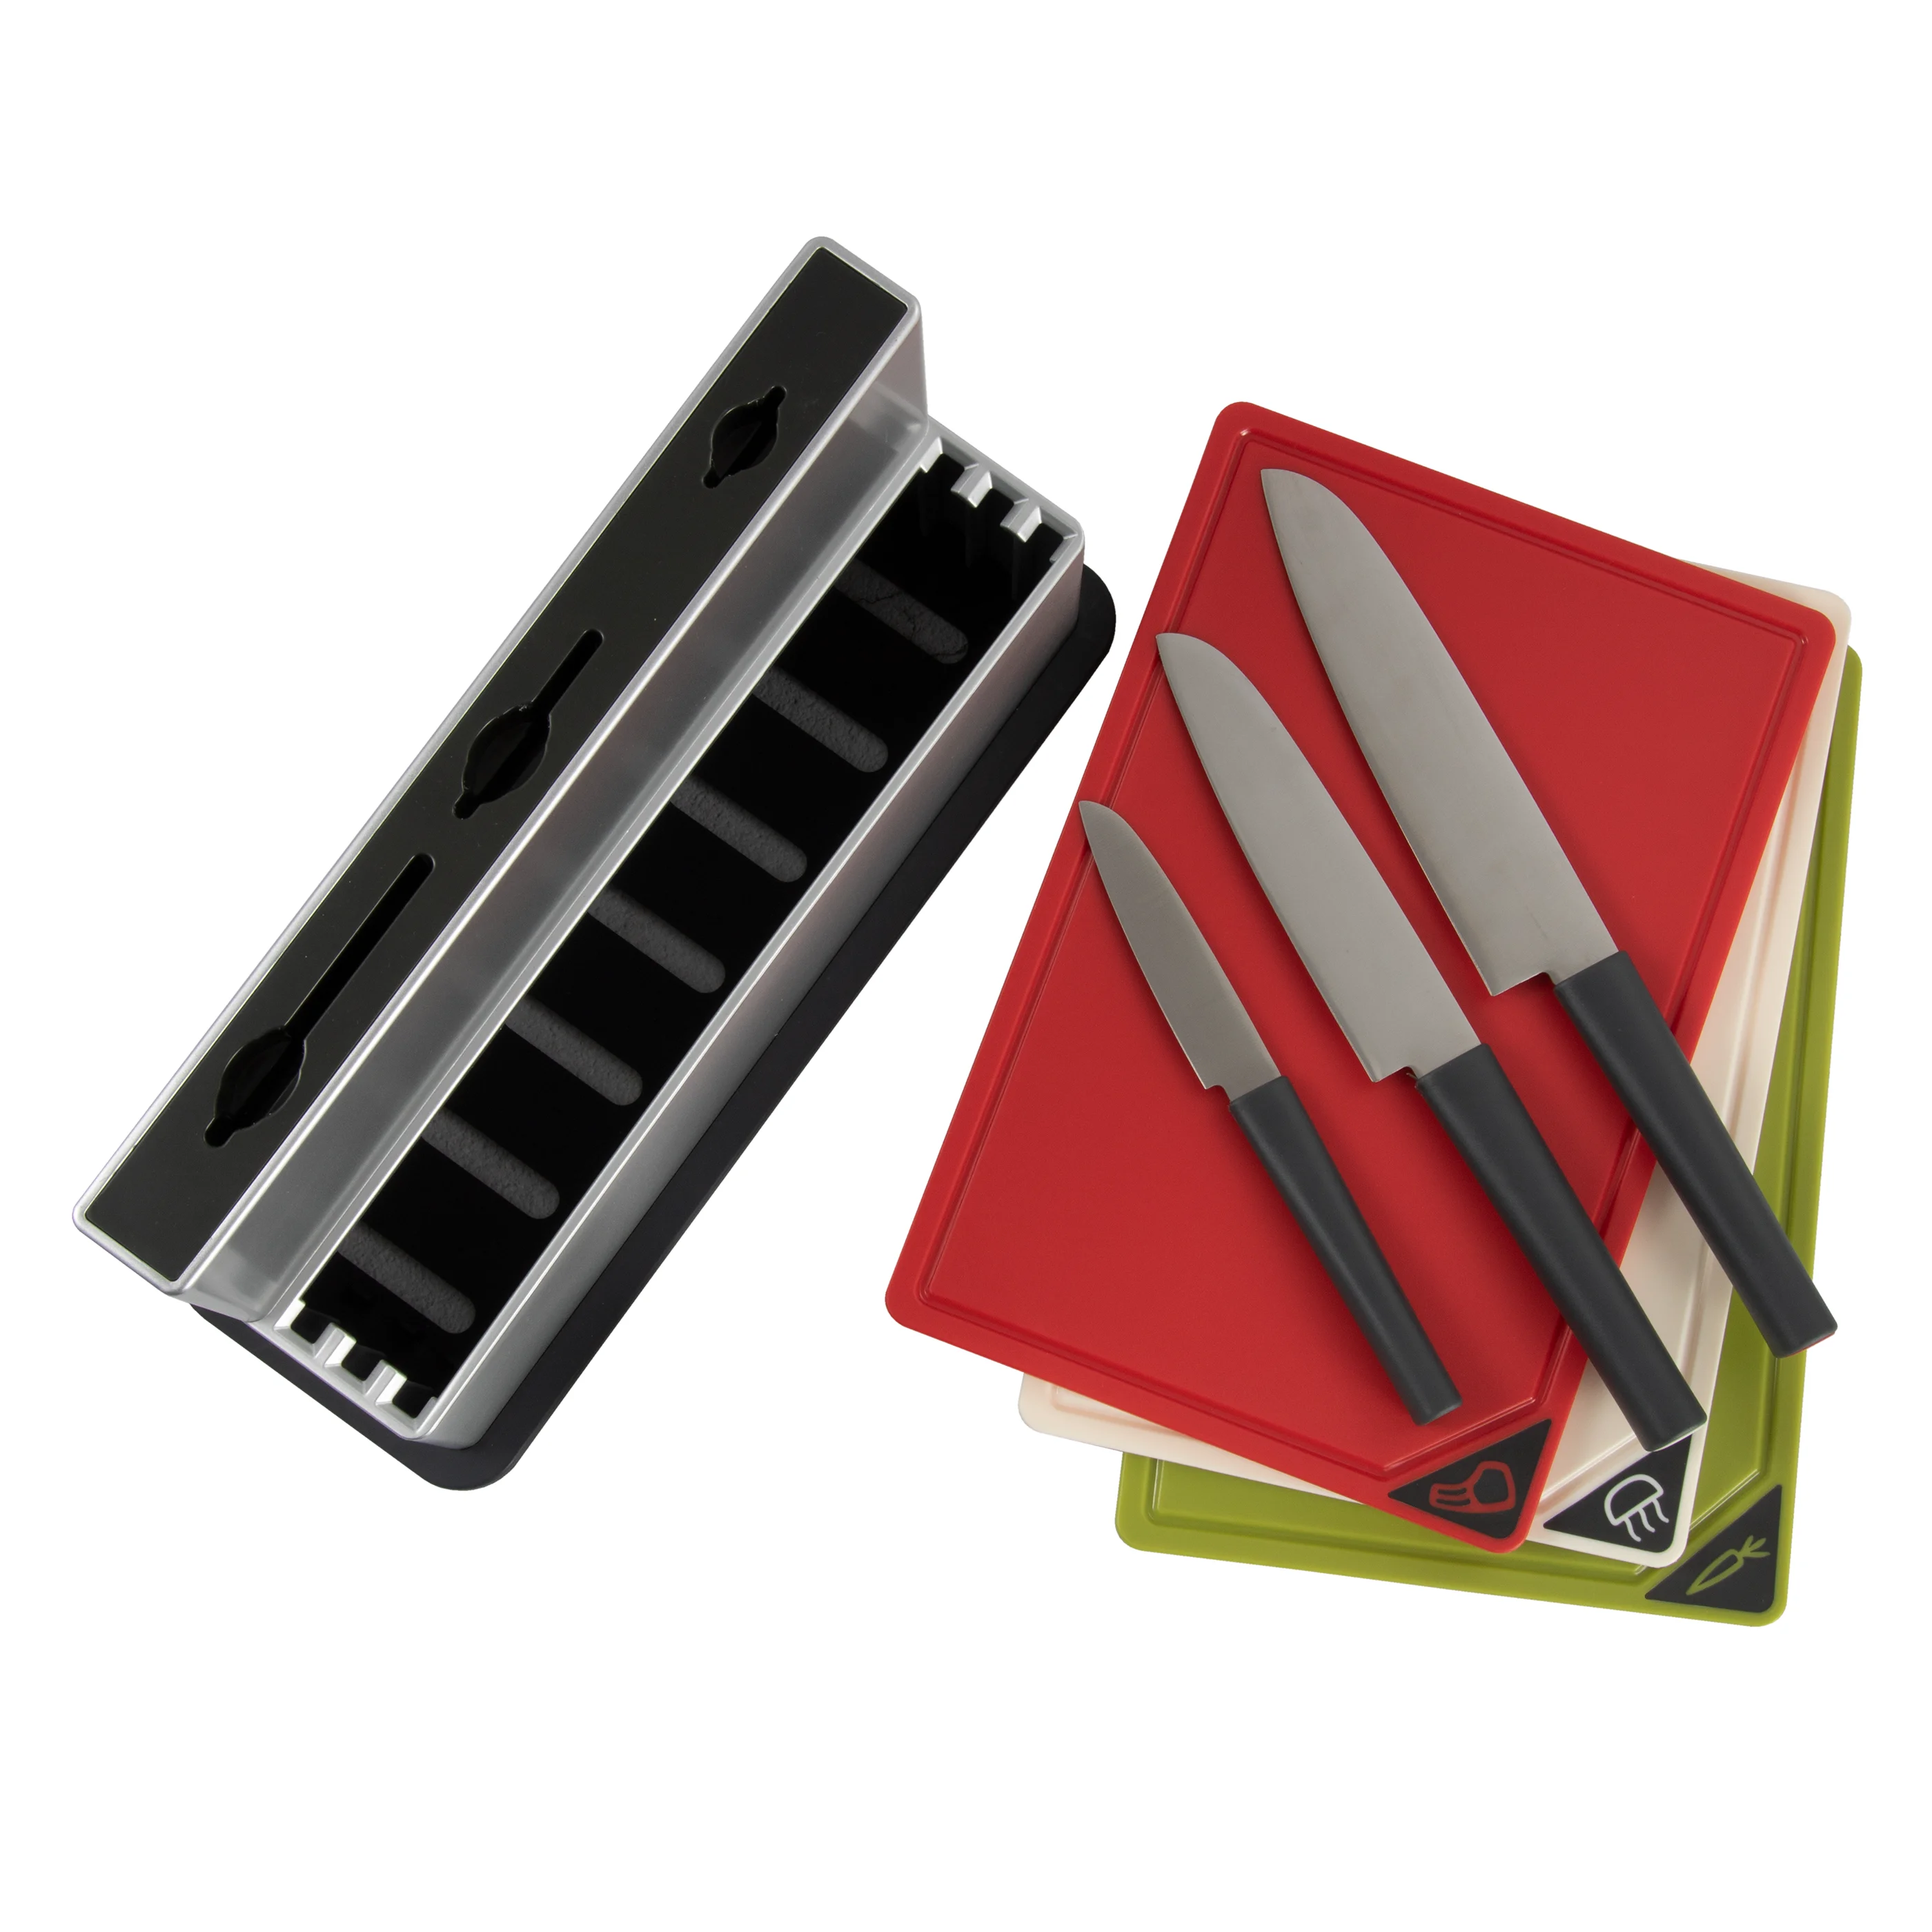 Multifunctional Cutting Board And Knife Set With Separate Cutting Boards For Raw And Cooked Food